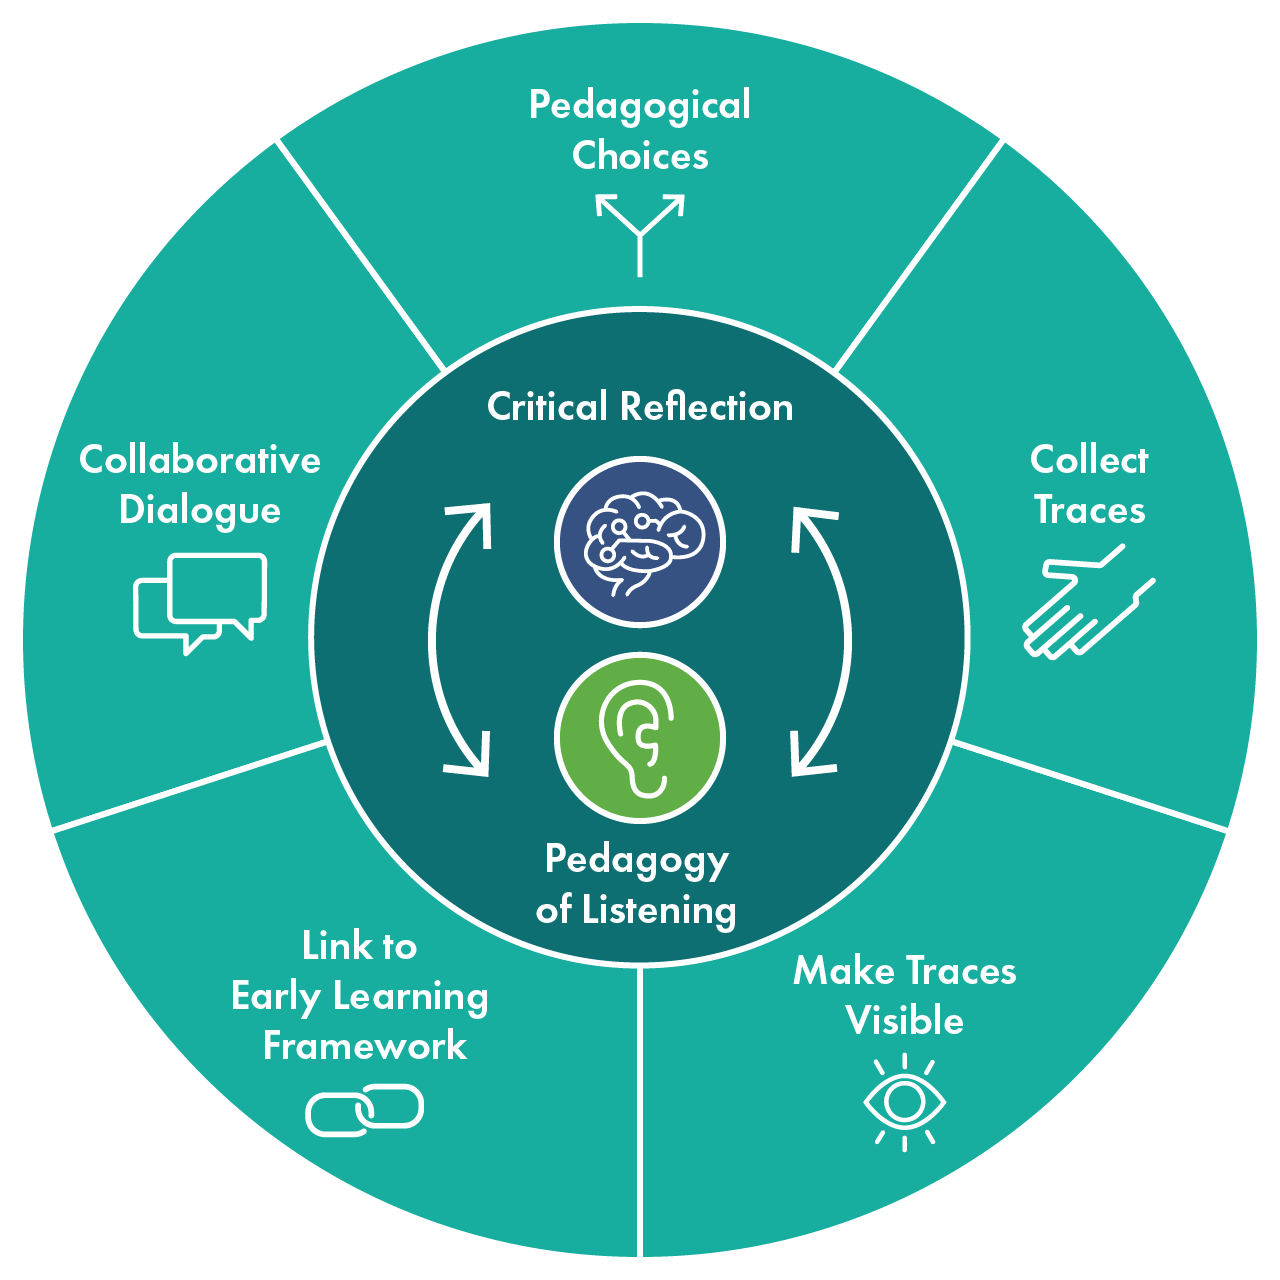 The process of pedagogical narration is ongoing and cyclical. Through critical reflection and a pedagogy of listening, educators are able to engage in collaboartive dialogue, make pedagogical choices, collect traces, make those traces visible and create links to the Early Learning Framework.